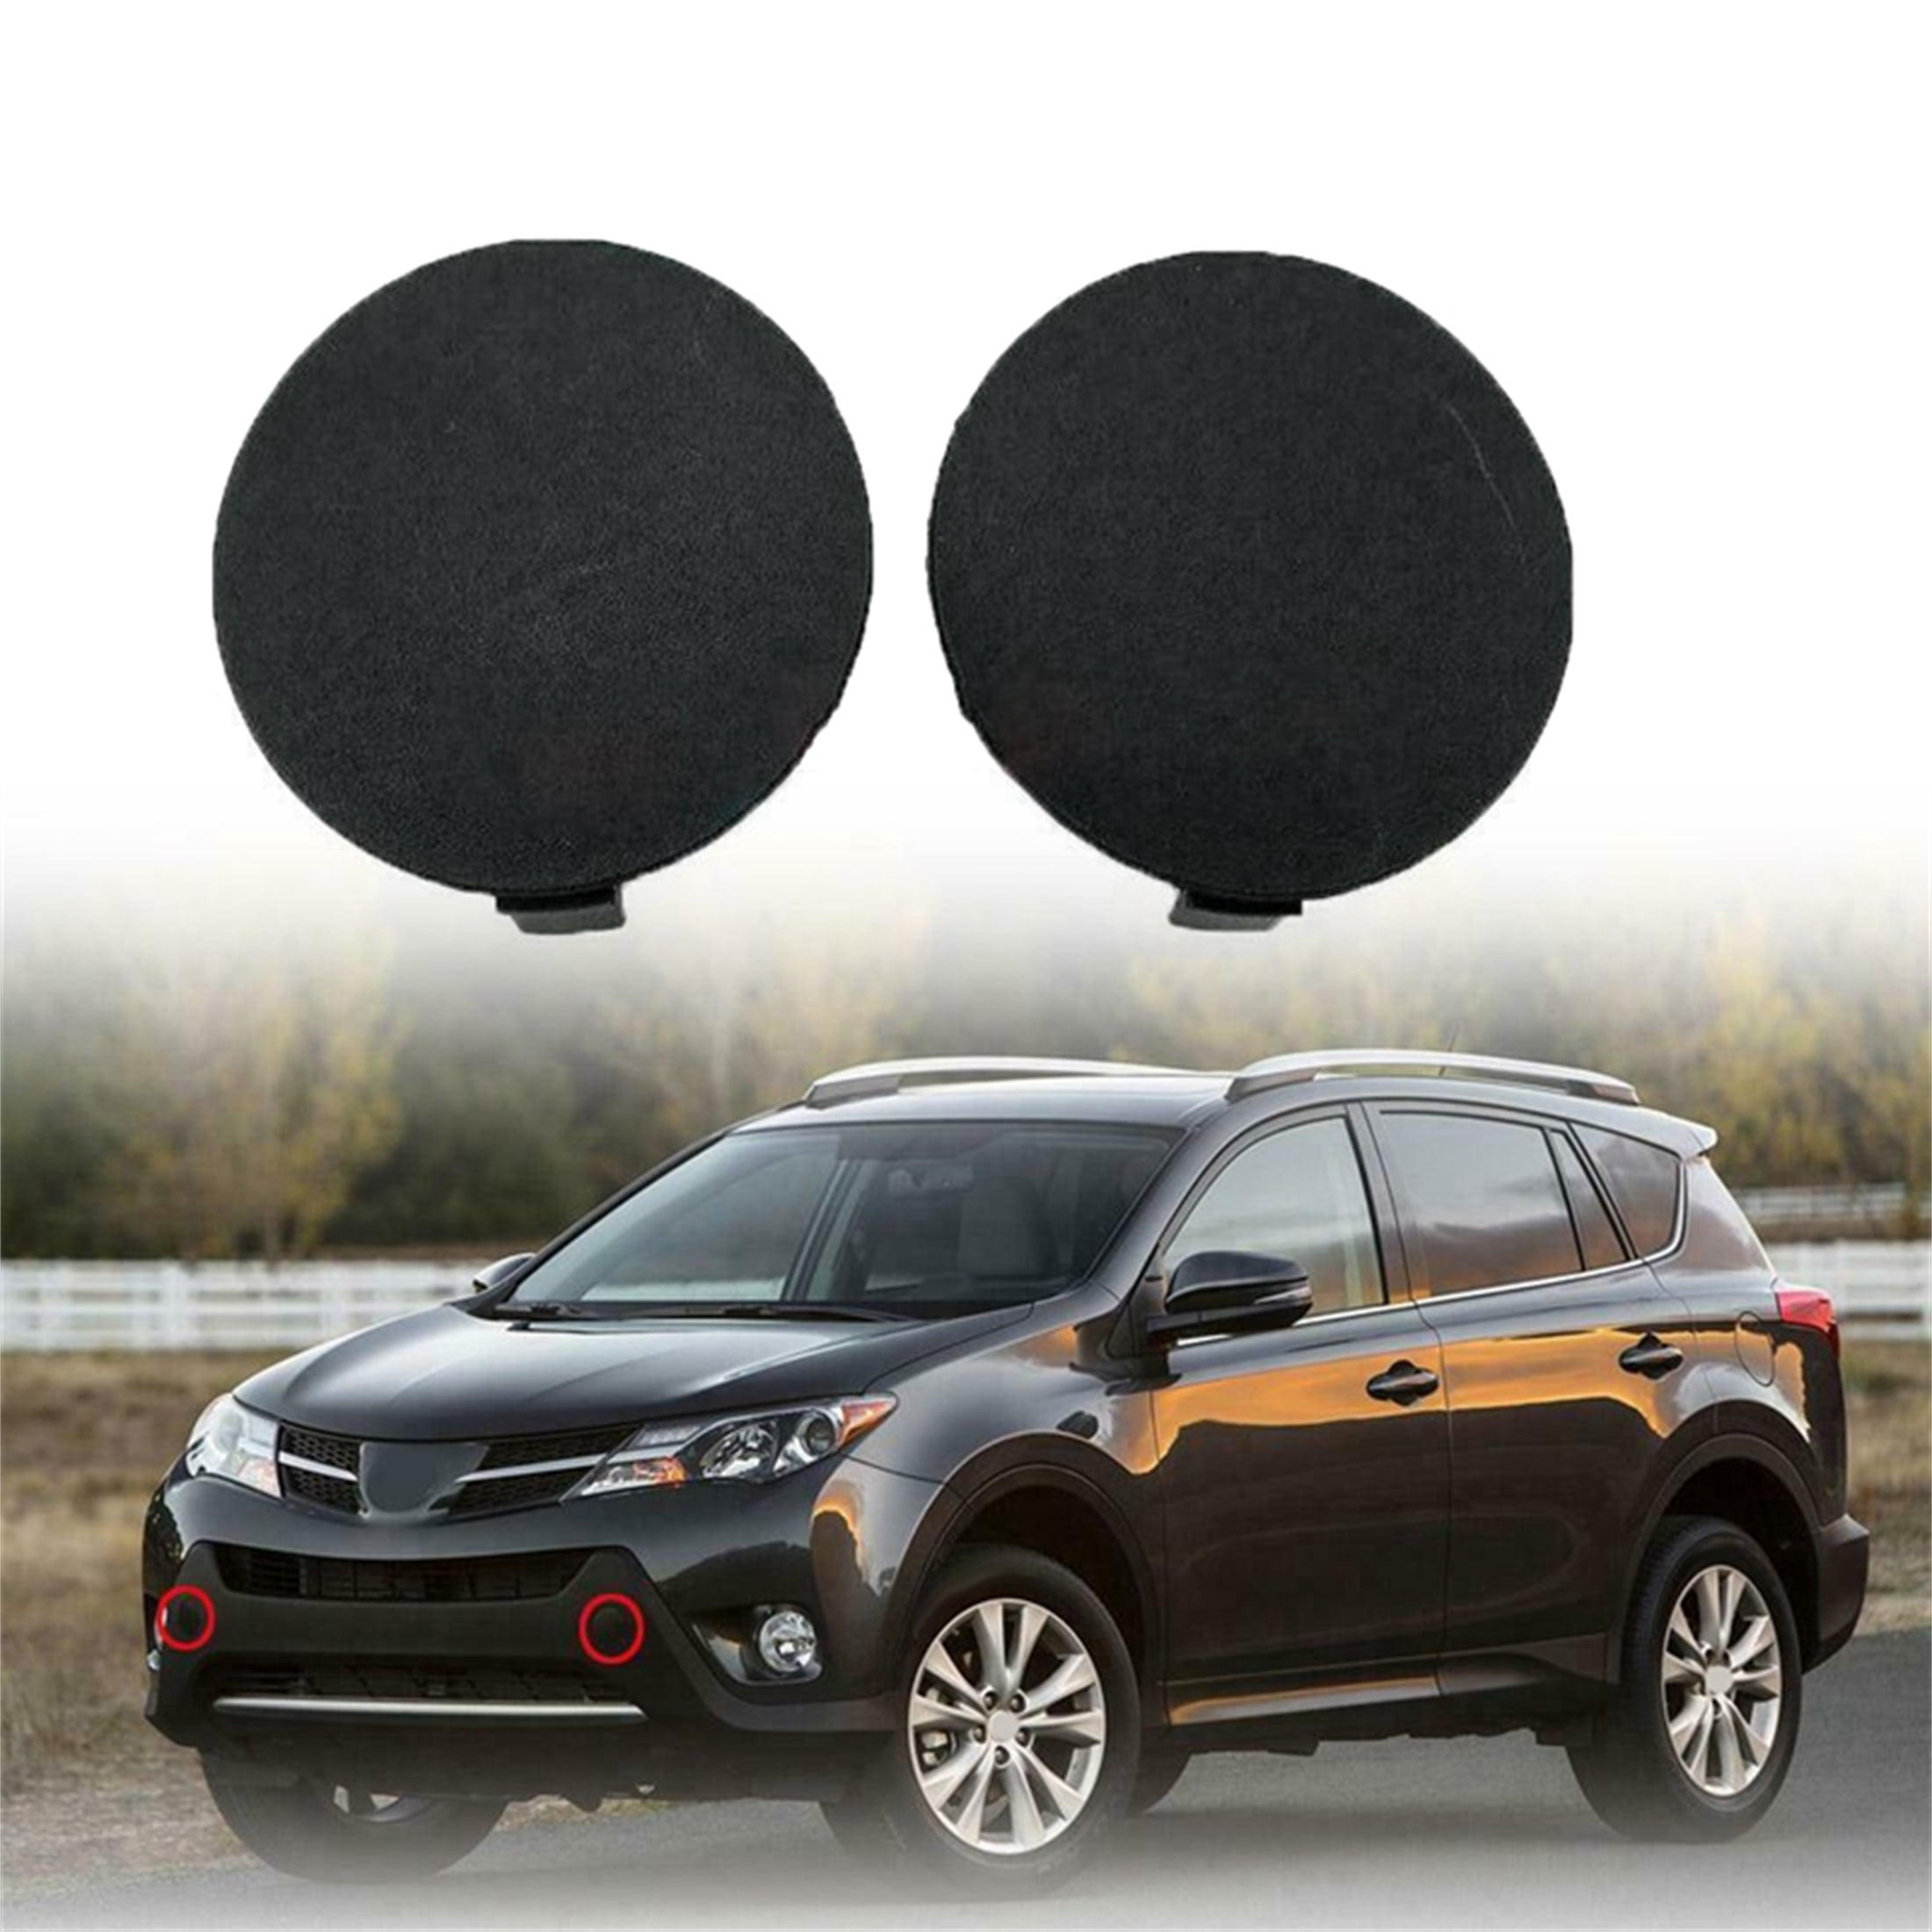 Front Bumper Hook Cover for 2013 2014 Toyota RAV4 Car Parts Accessories -